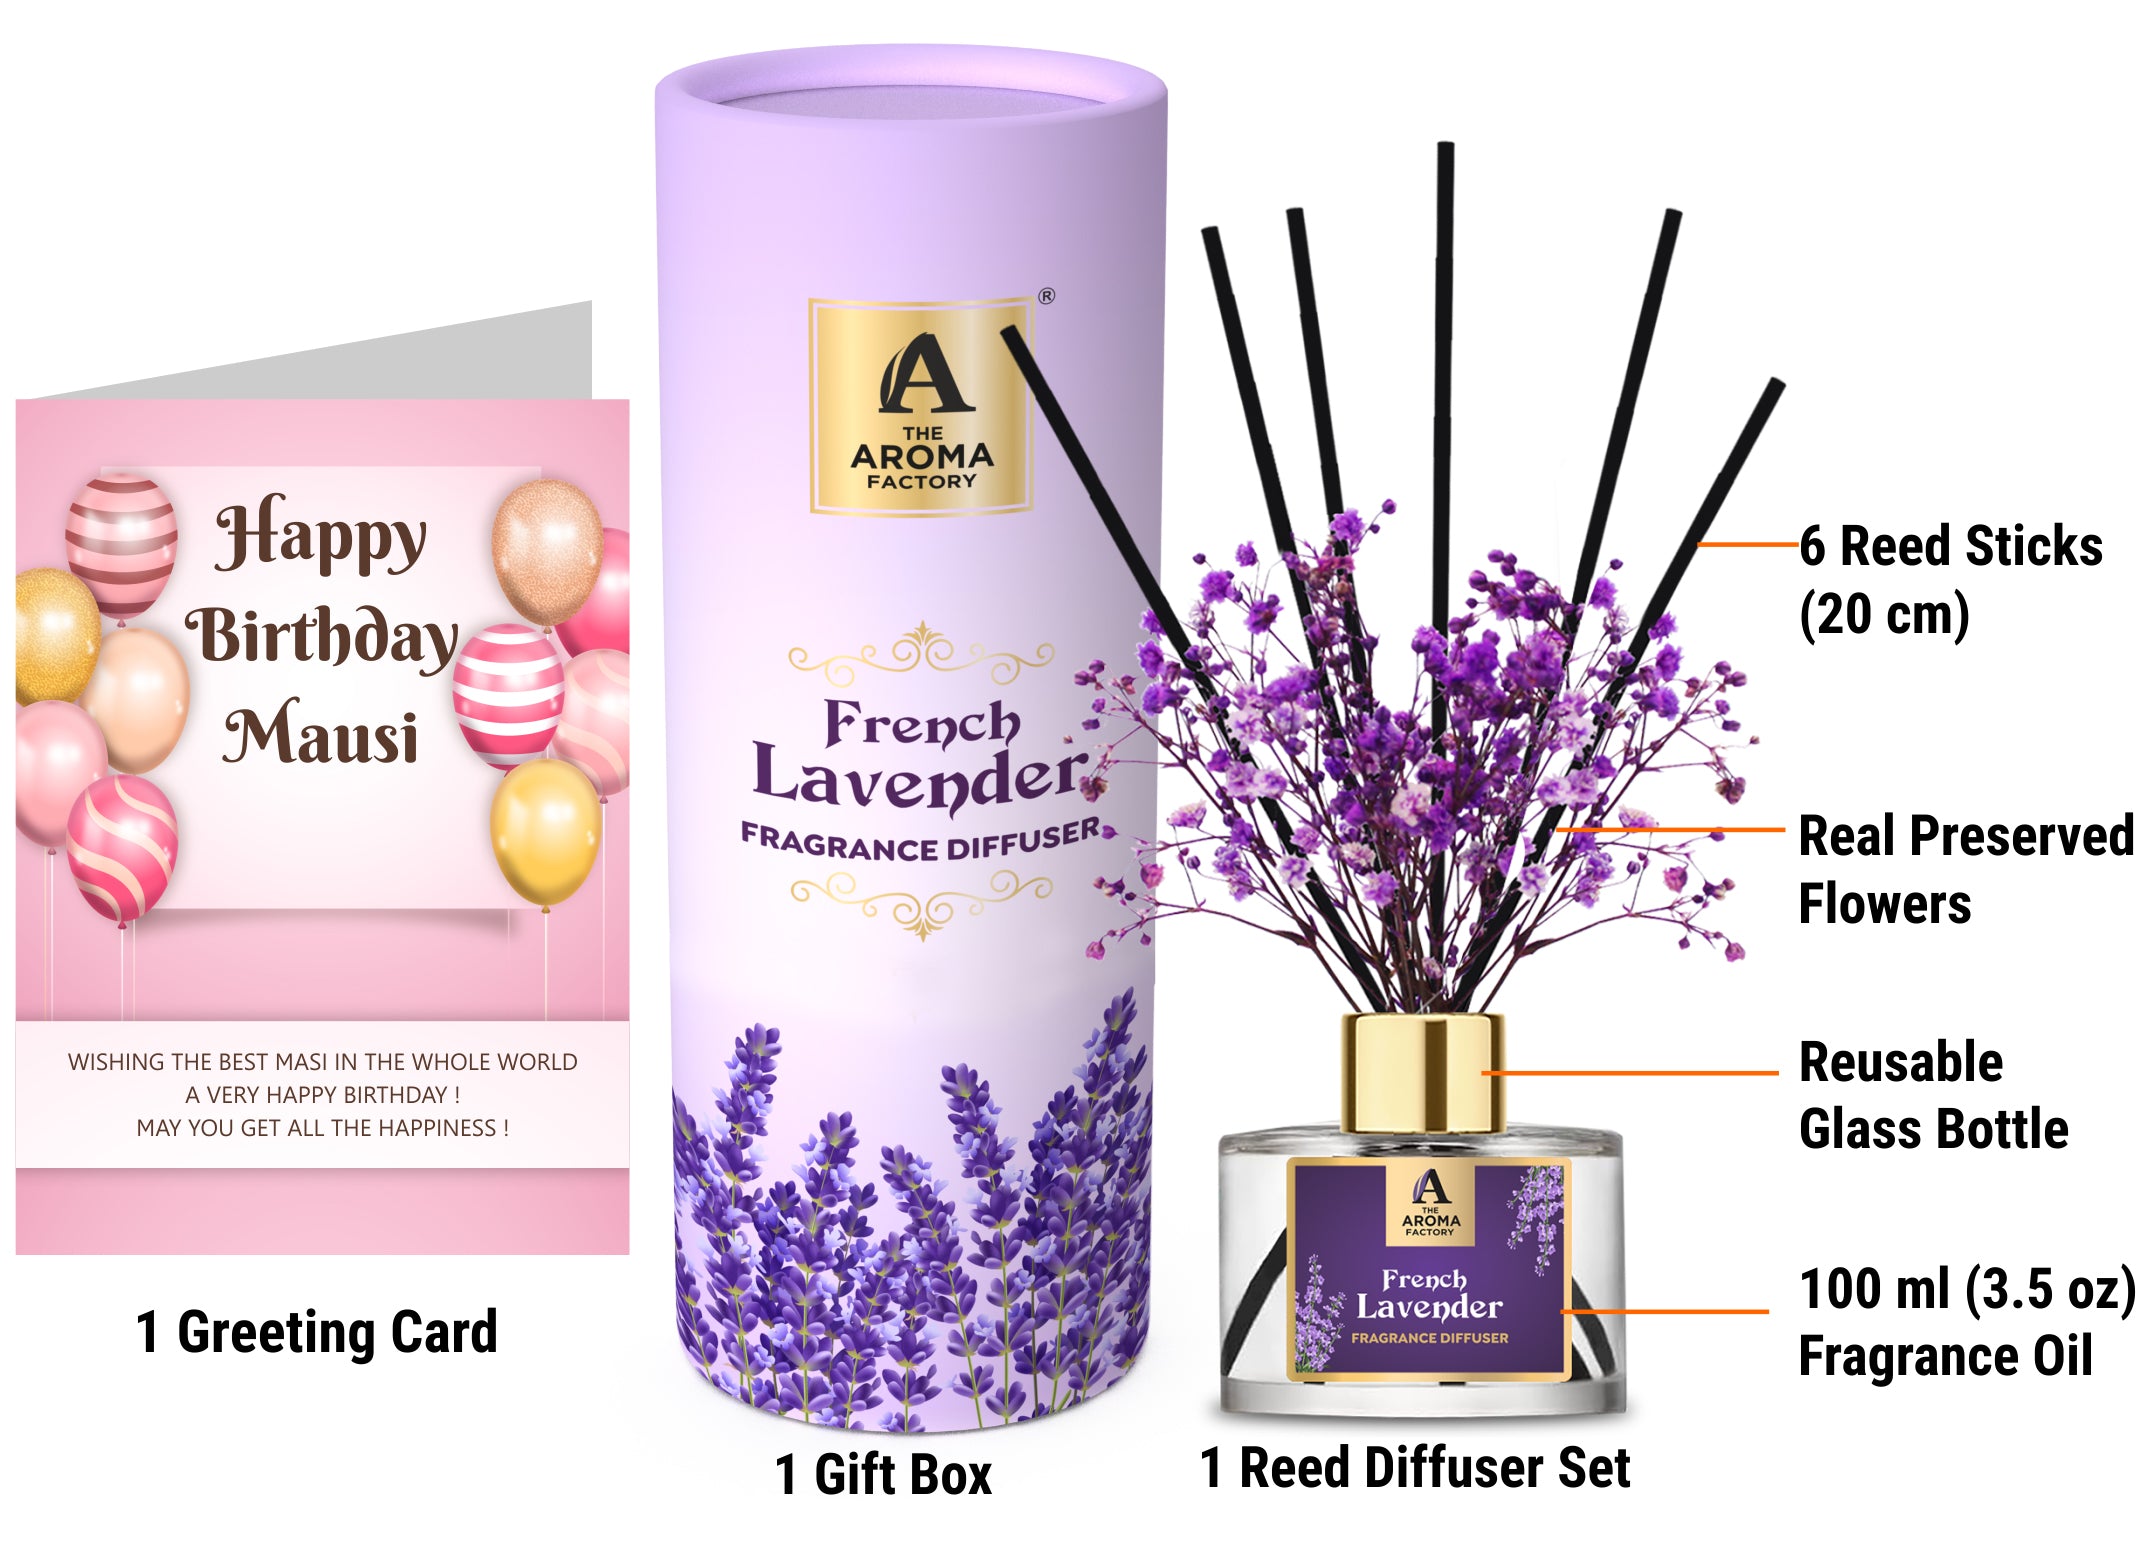 The Aroma Factory Happy Birthday MASI/Mausi Gift with Card, French Lavender Fragrance Reed Diffuser Set (1 Box + 1 Card)